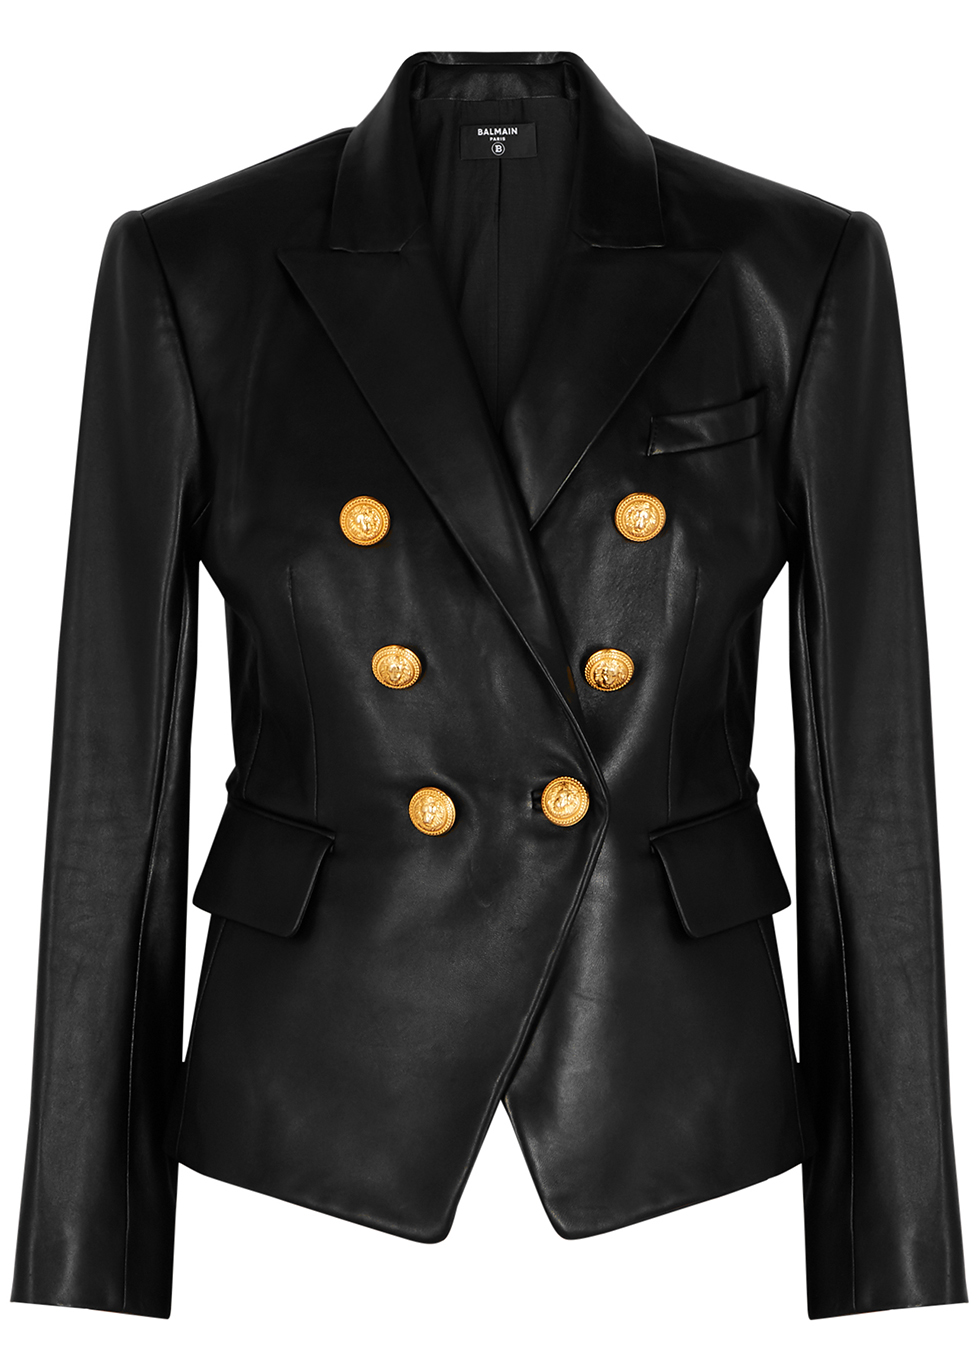 Black double-breasted leather blazer